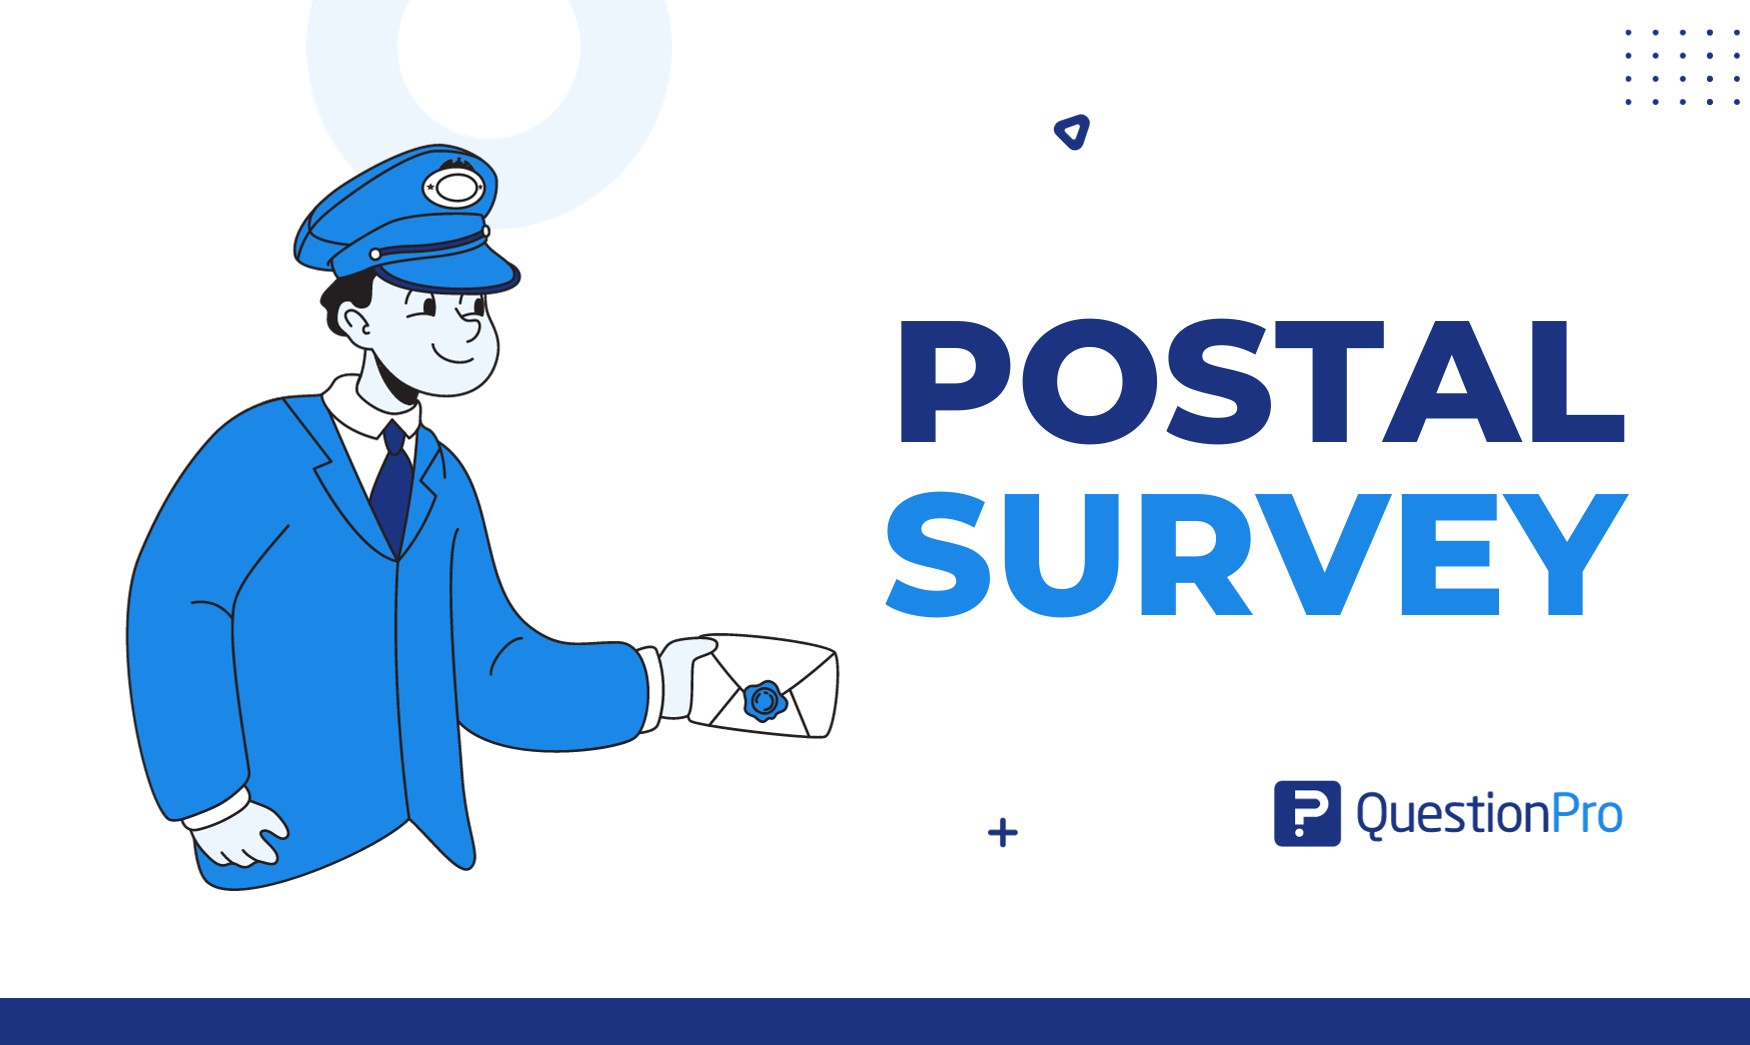 A postal survey sends and receives surveys by mail. Uncover the drawbacks and modern alternatives for a more efficient approach to surveying.